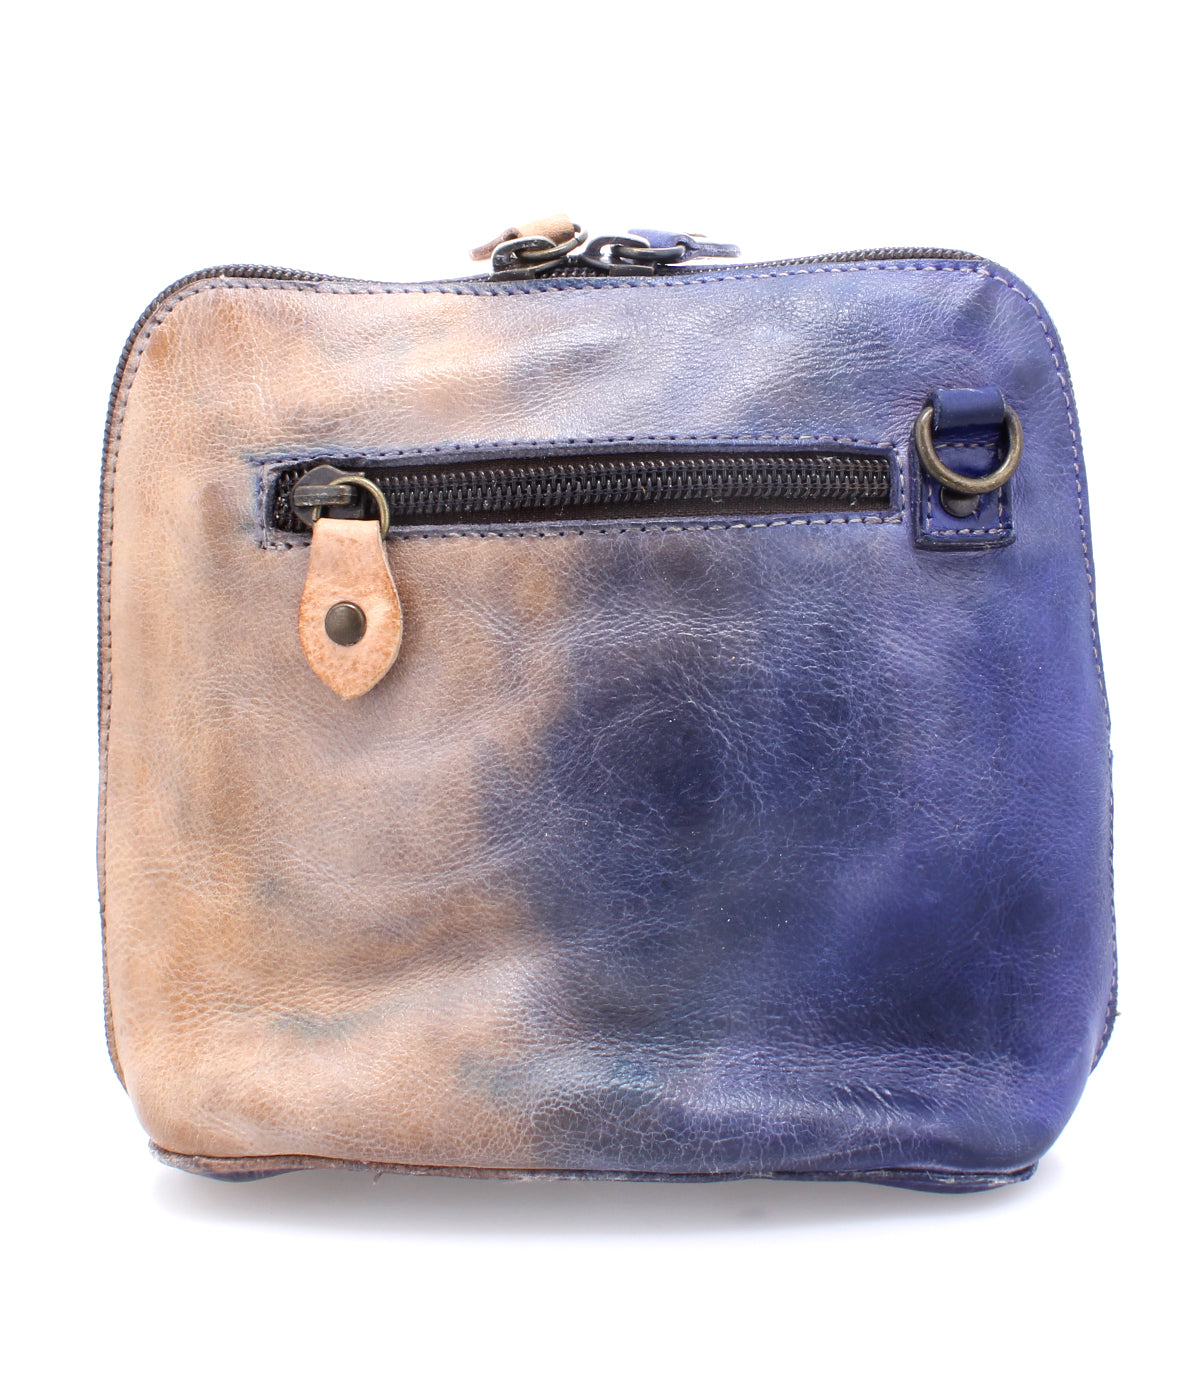 A blue and tan leather Bed Stu purse with a zipper, perfect for your Saturday adventure in Ventura.